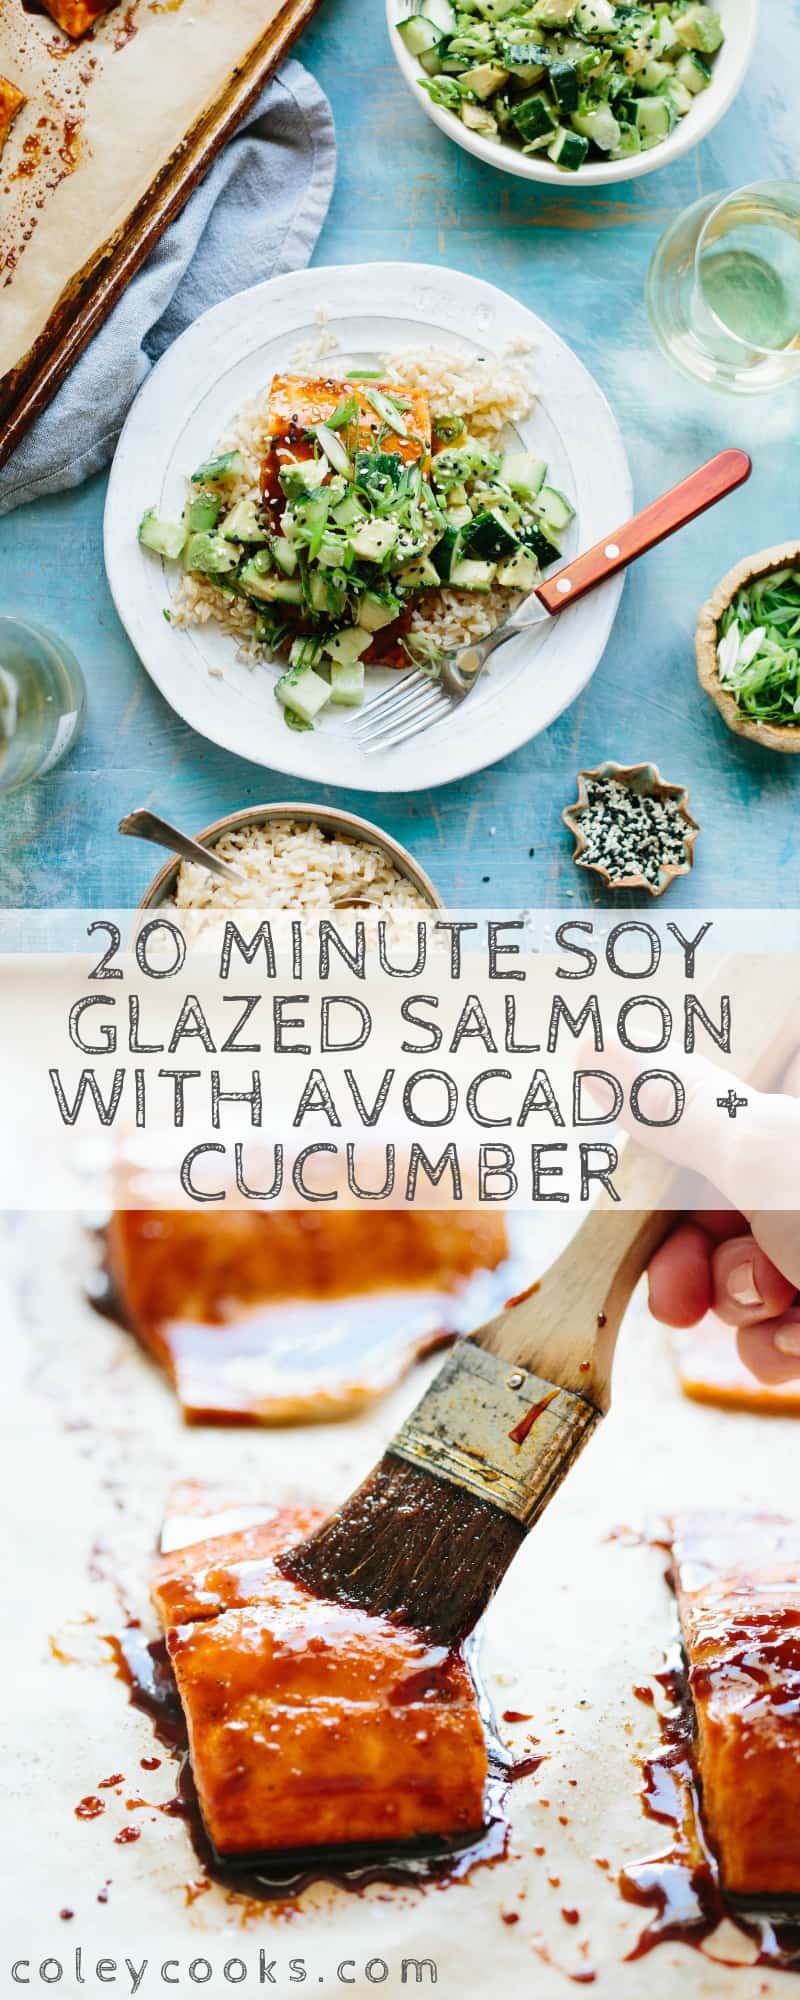 Pinterest collage of soy glazed salmon with avocado cucumber salad recipe.